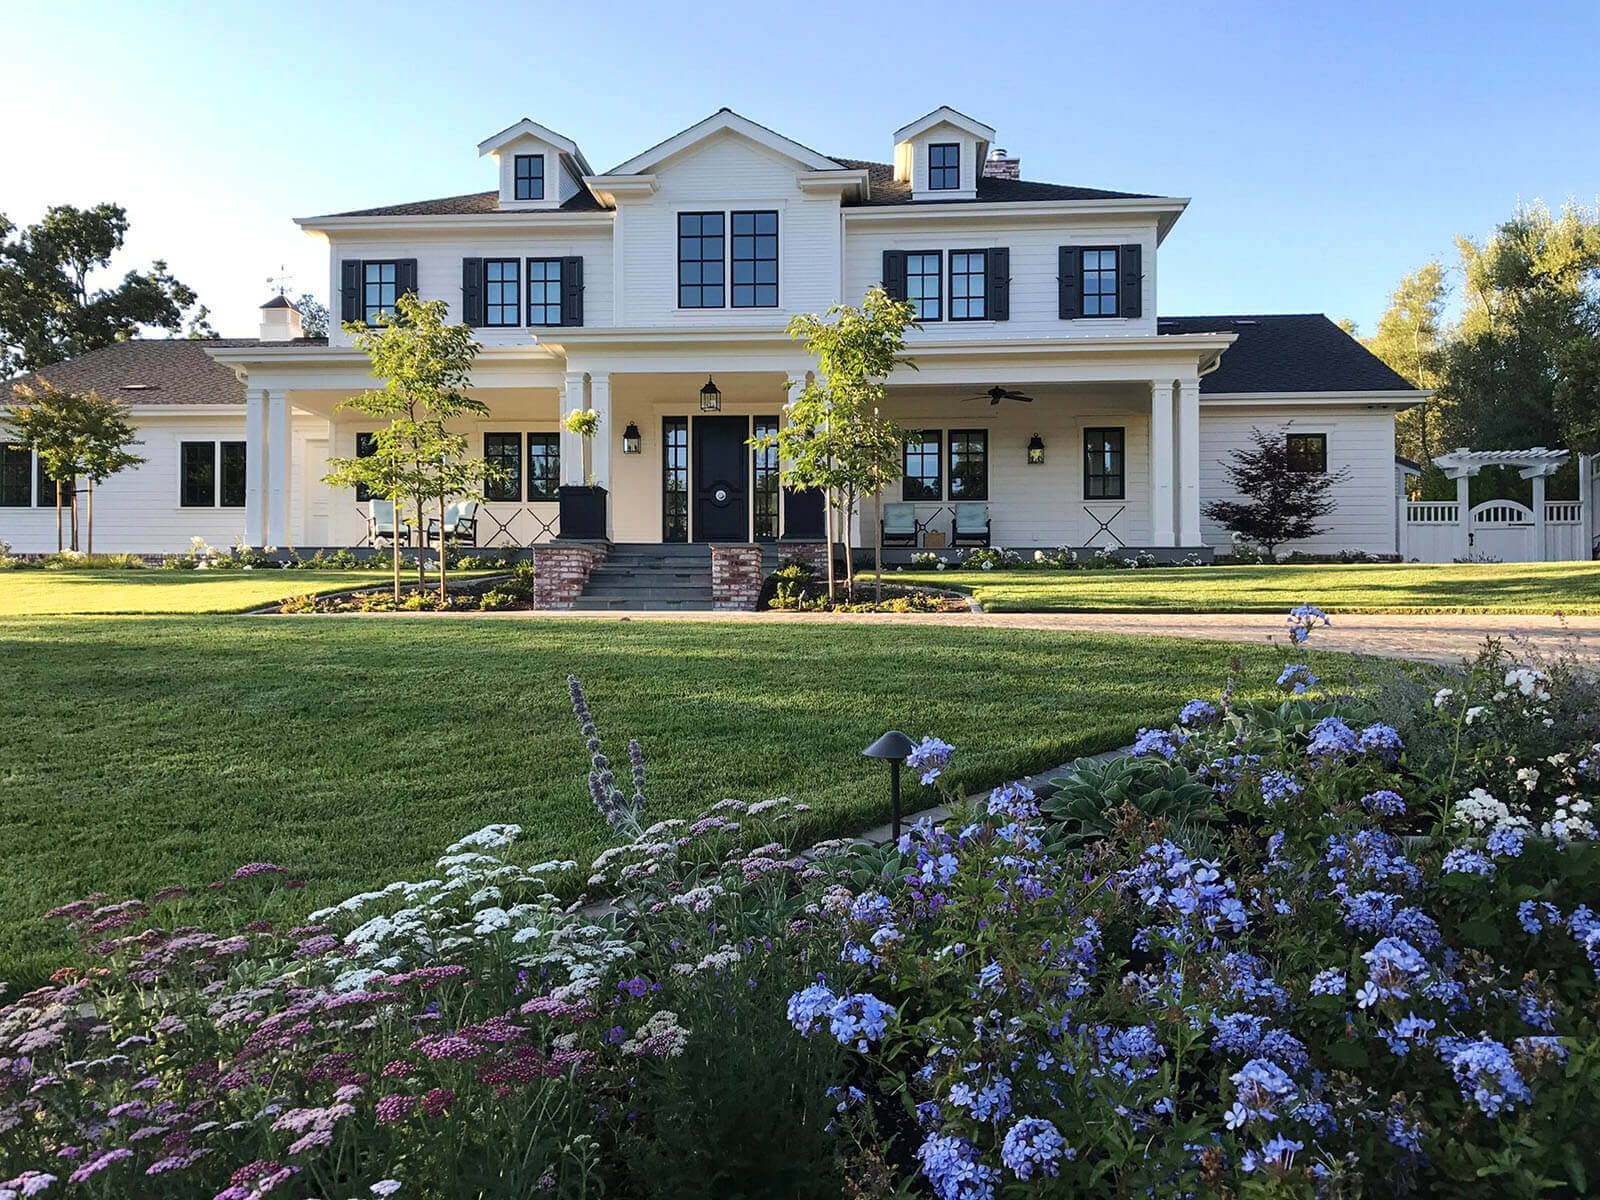 Large sprawling front yard with clustered blue, violet, and white flowers, and large shaded front porch